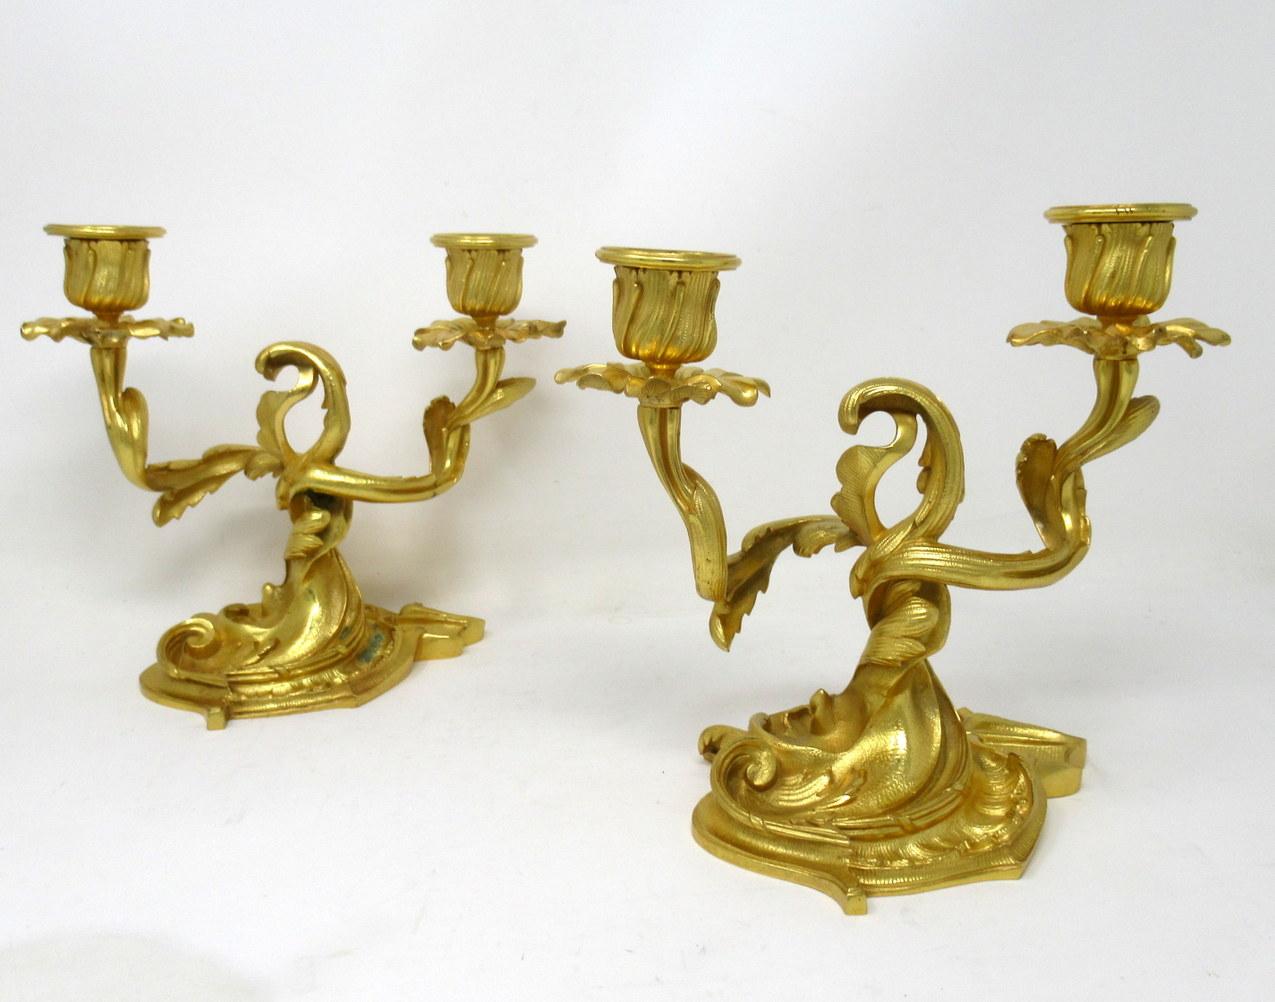 A very stylish pair of twin light gilt heavy gauge gilt bronze ormolu table or mantle candelabra in George III Style, last quarter of the 19th century, of French origin. 

Each with central rococo style finial and two scrolling leafy out swept